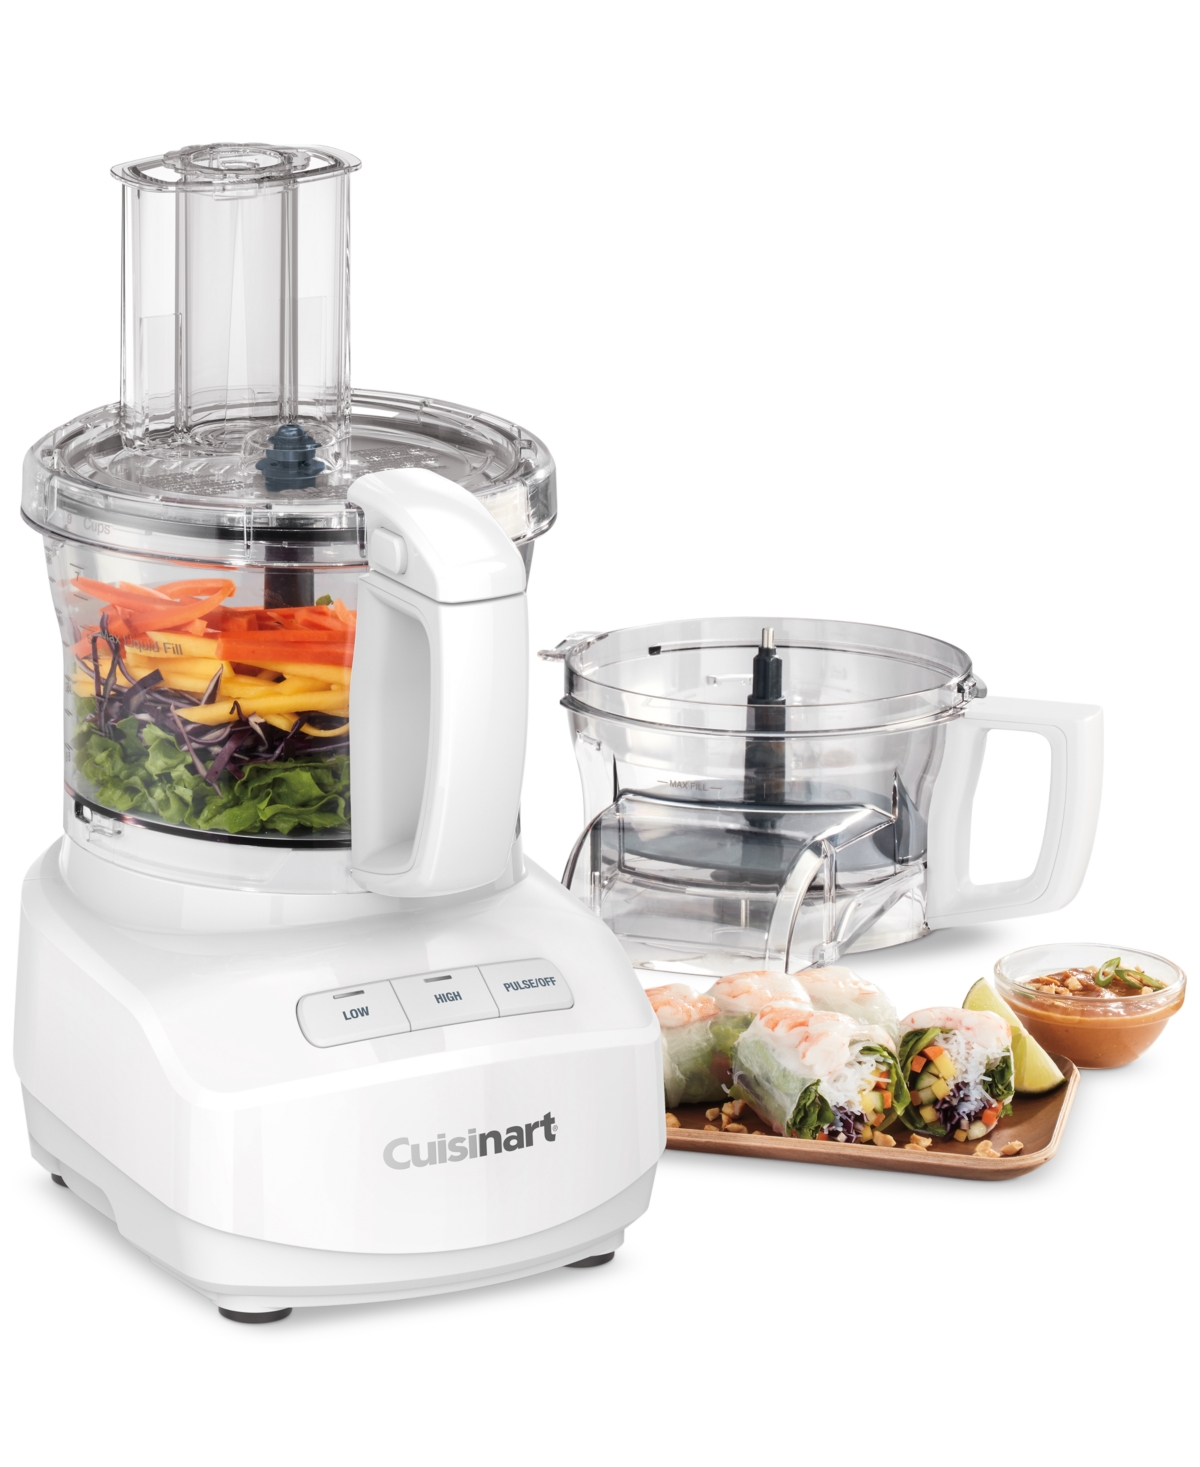 Cuisinart 9-cup Continuous Feed Food Processor In White